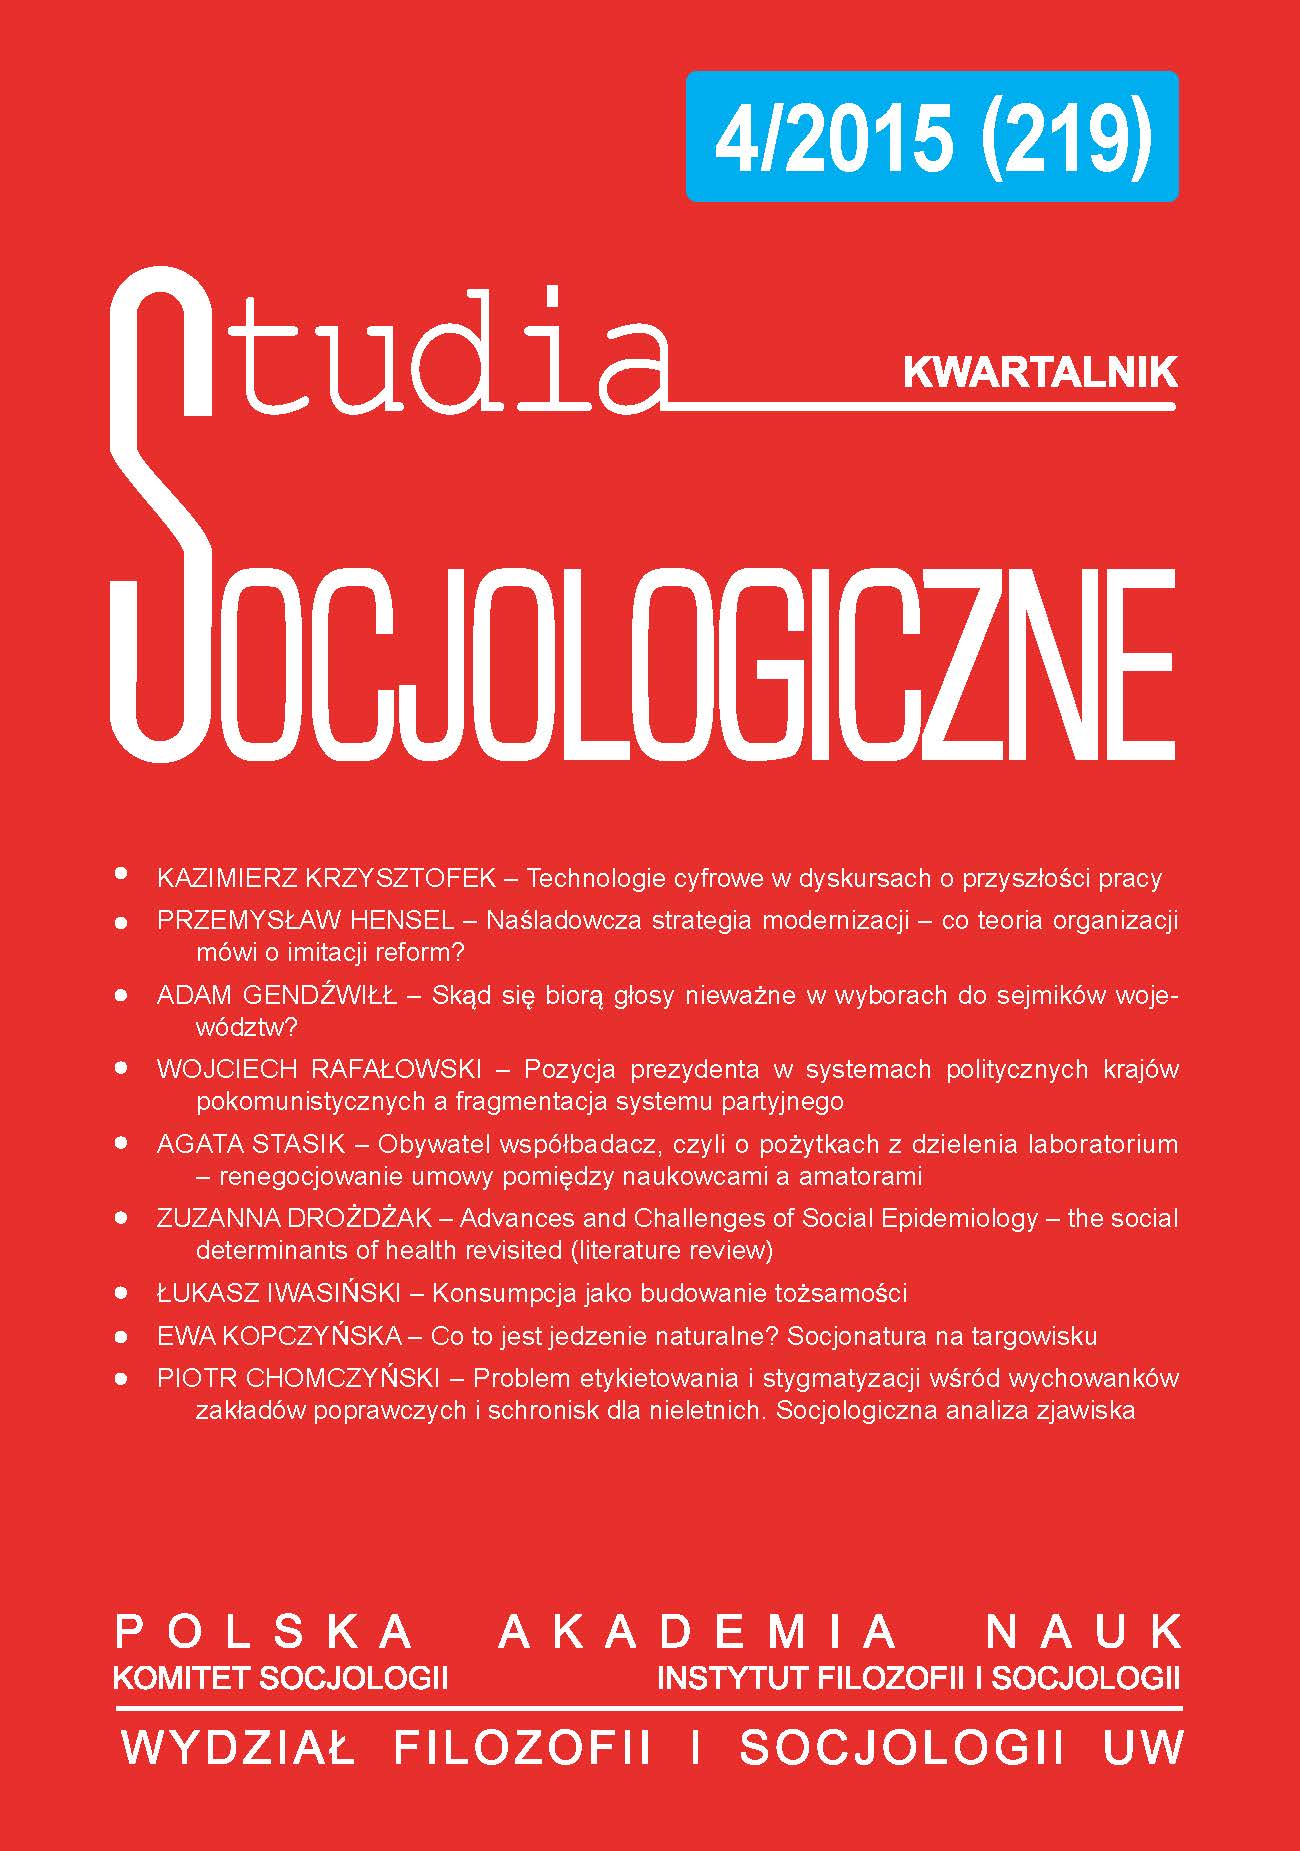 Cultural Anthropology and the Phenomenon of Computer Games (review of: Gry komputerowe w perspektywie antropologii codzienności [Computer Games in the Perspective of Anthropology of Everyday Life] by Radosław Bomba) Cover Image